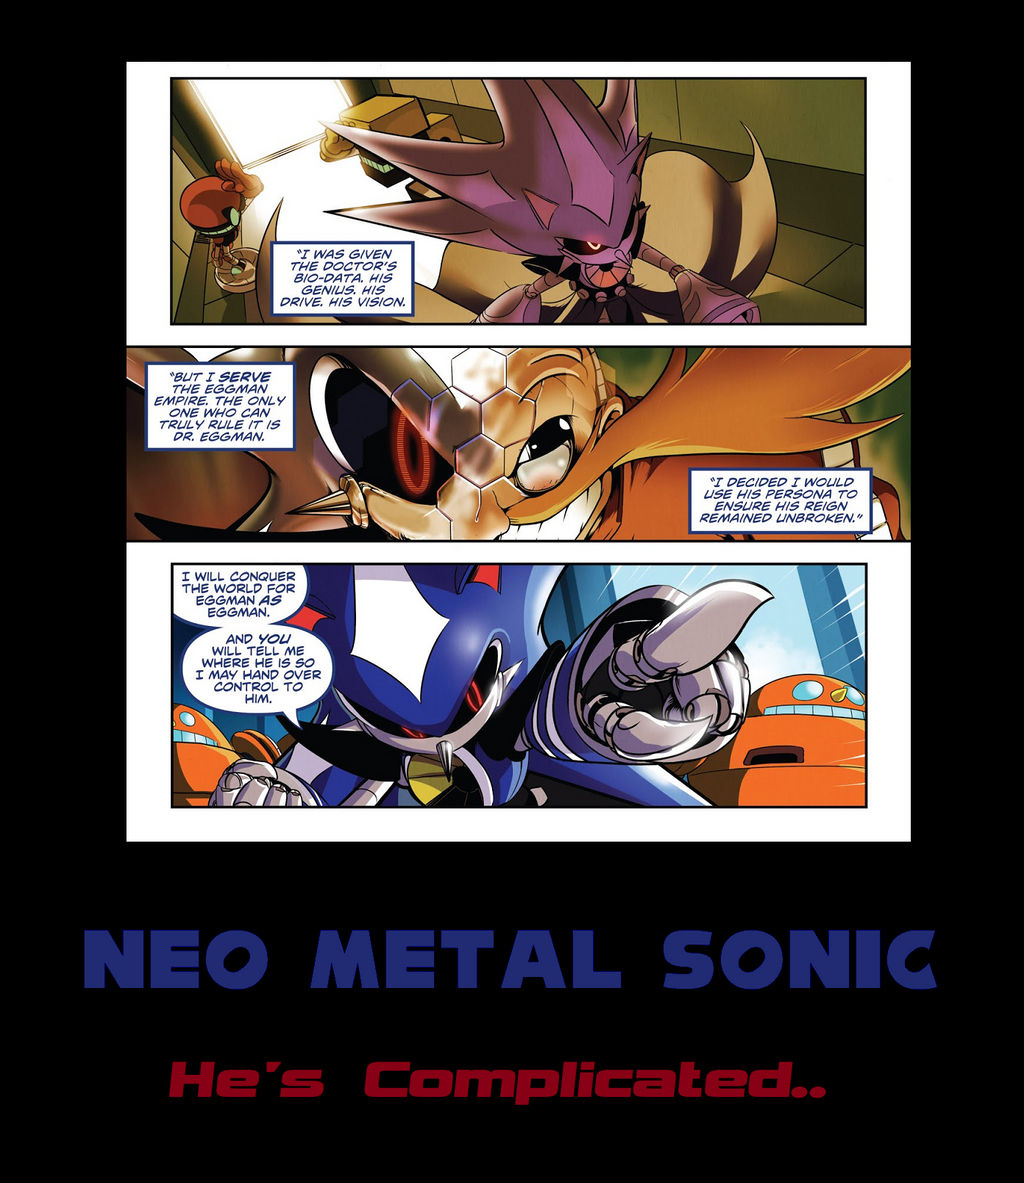 Sonic IDW issue 7 sonic vs Neo metal sonic yami speedy's dubbed